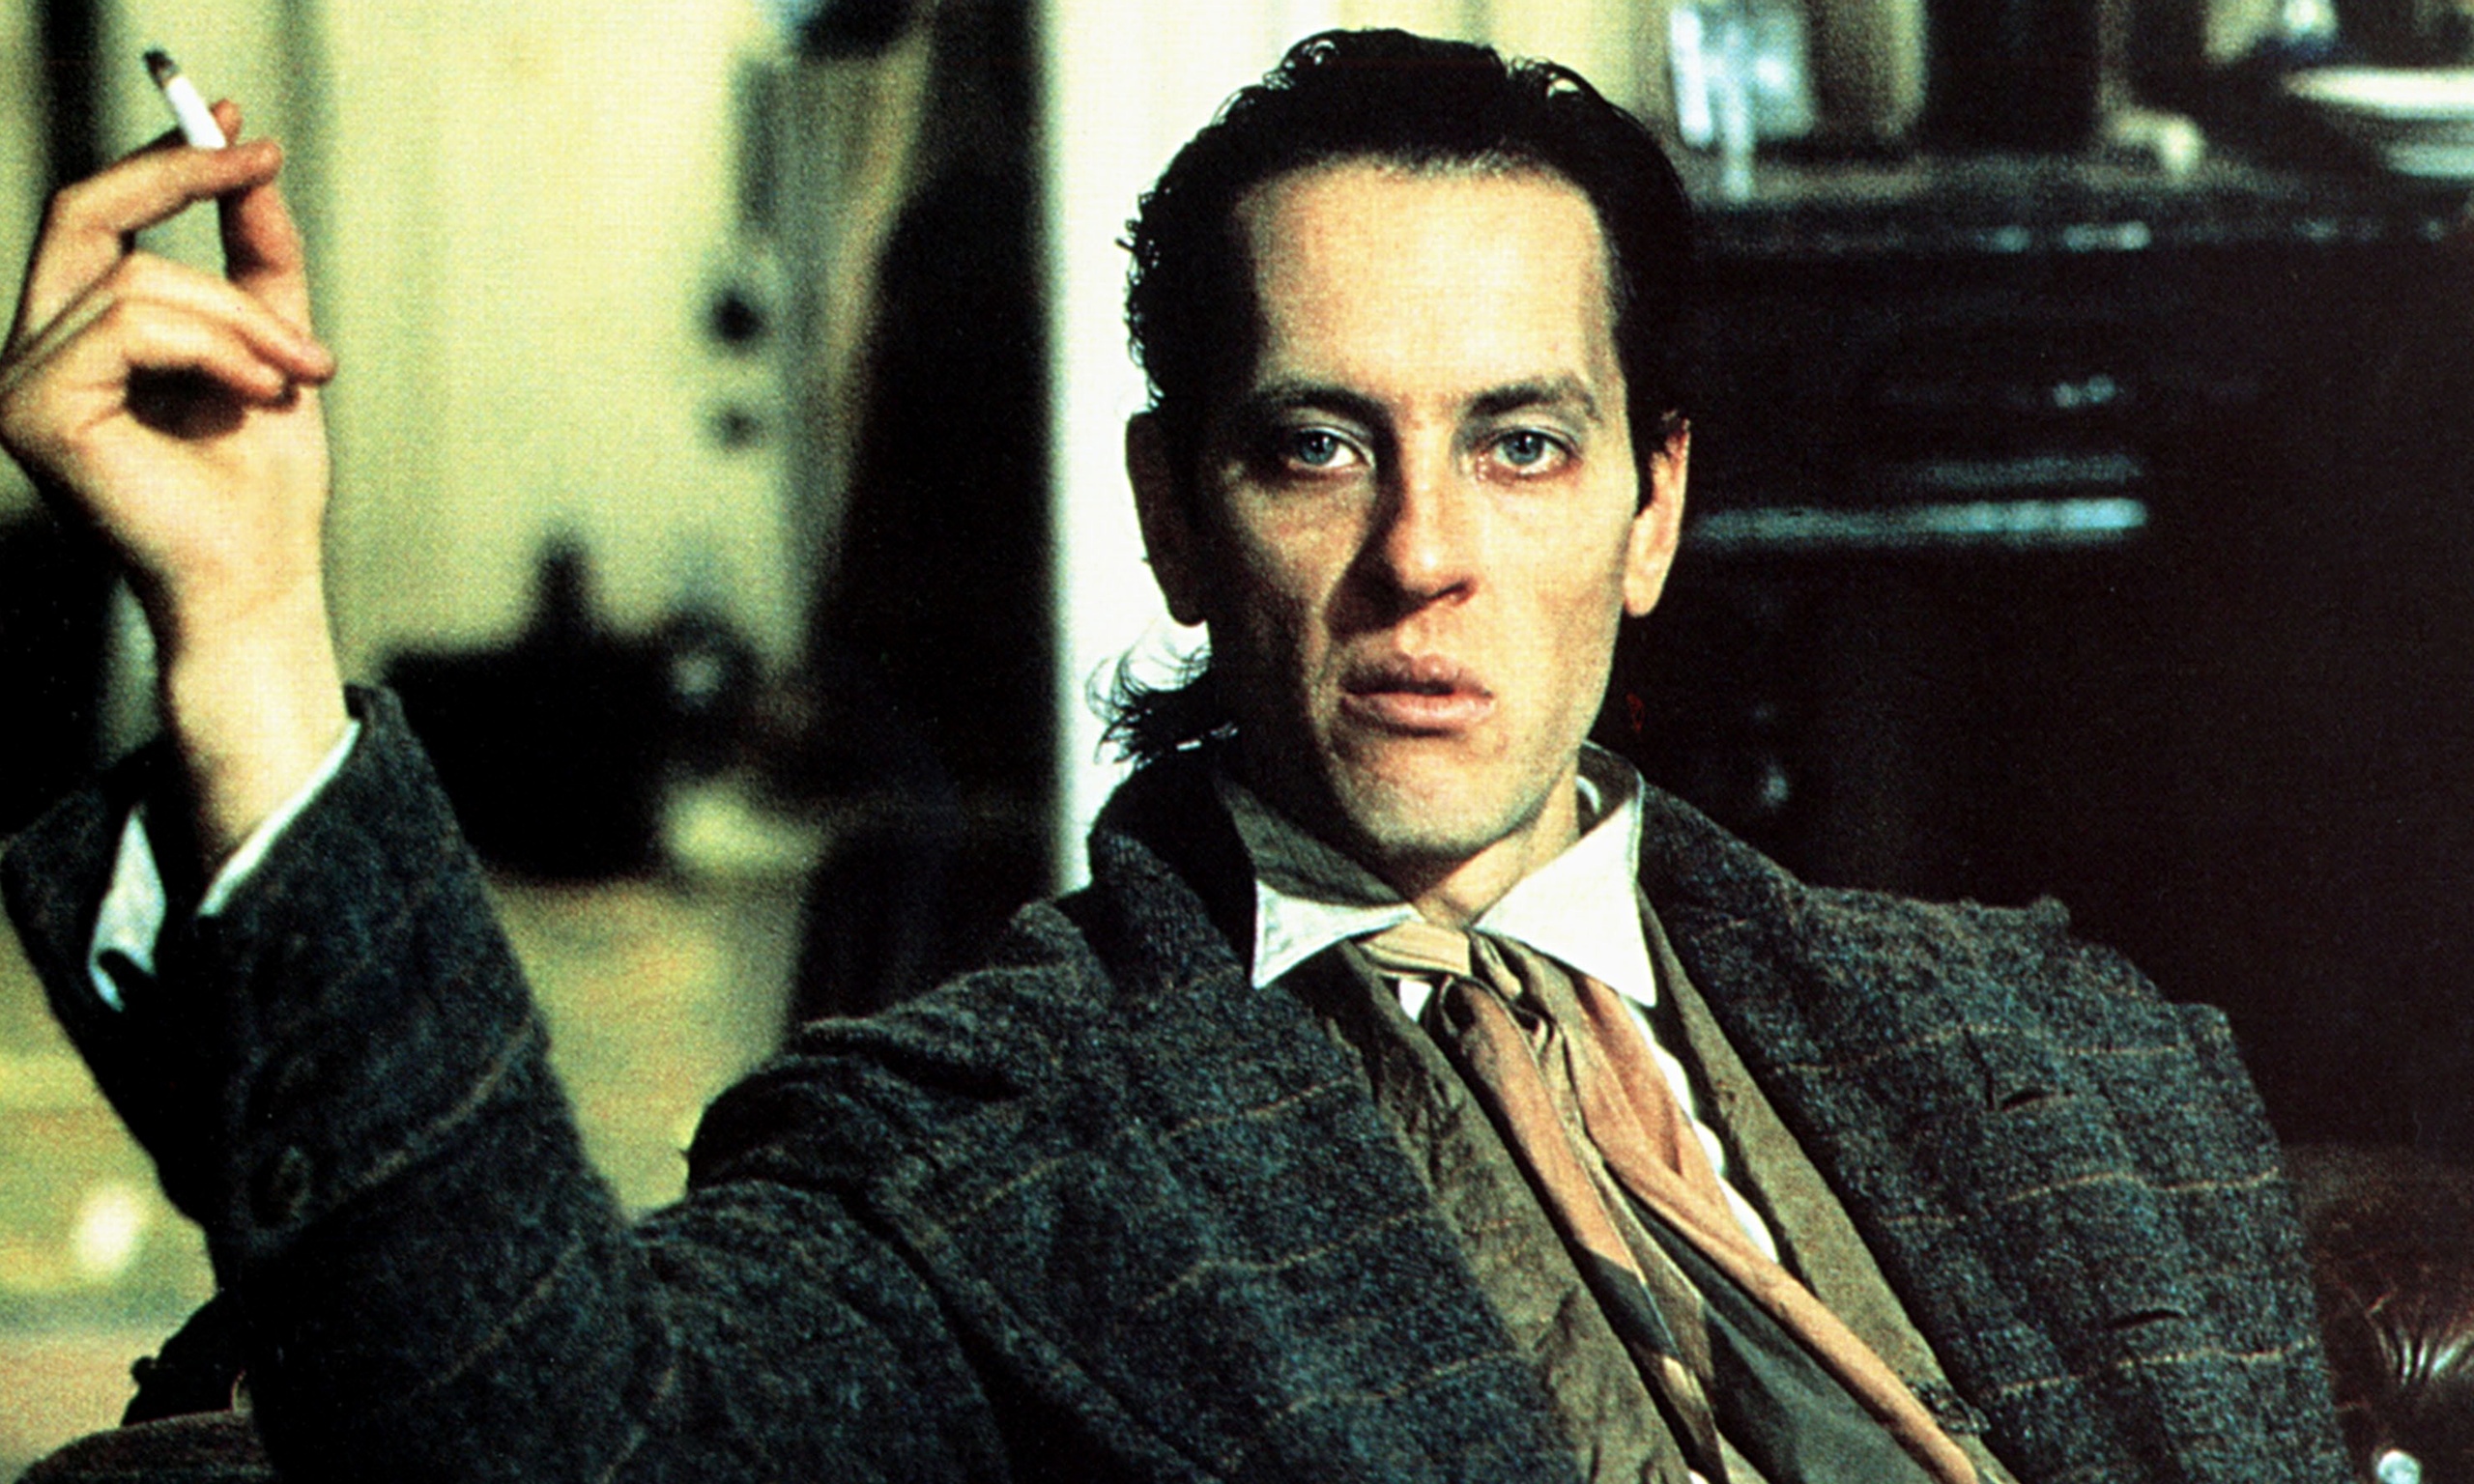 https://static-secure.guim.co.uk/sys-images/Guardian/Pix/pictures/2014/10/1/1412184830065/Withnail-and-I-014.jpg